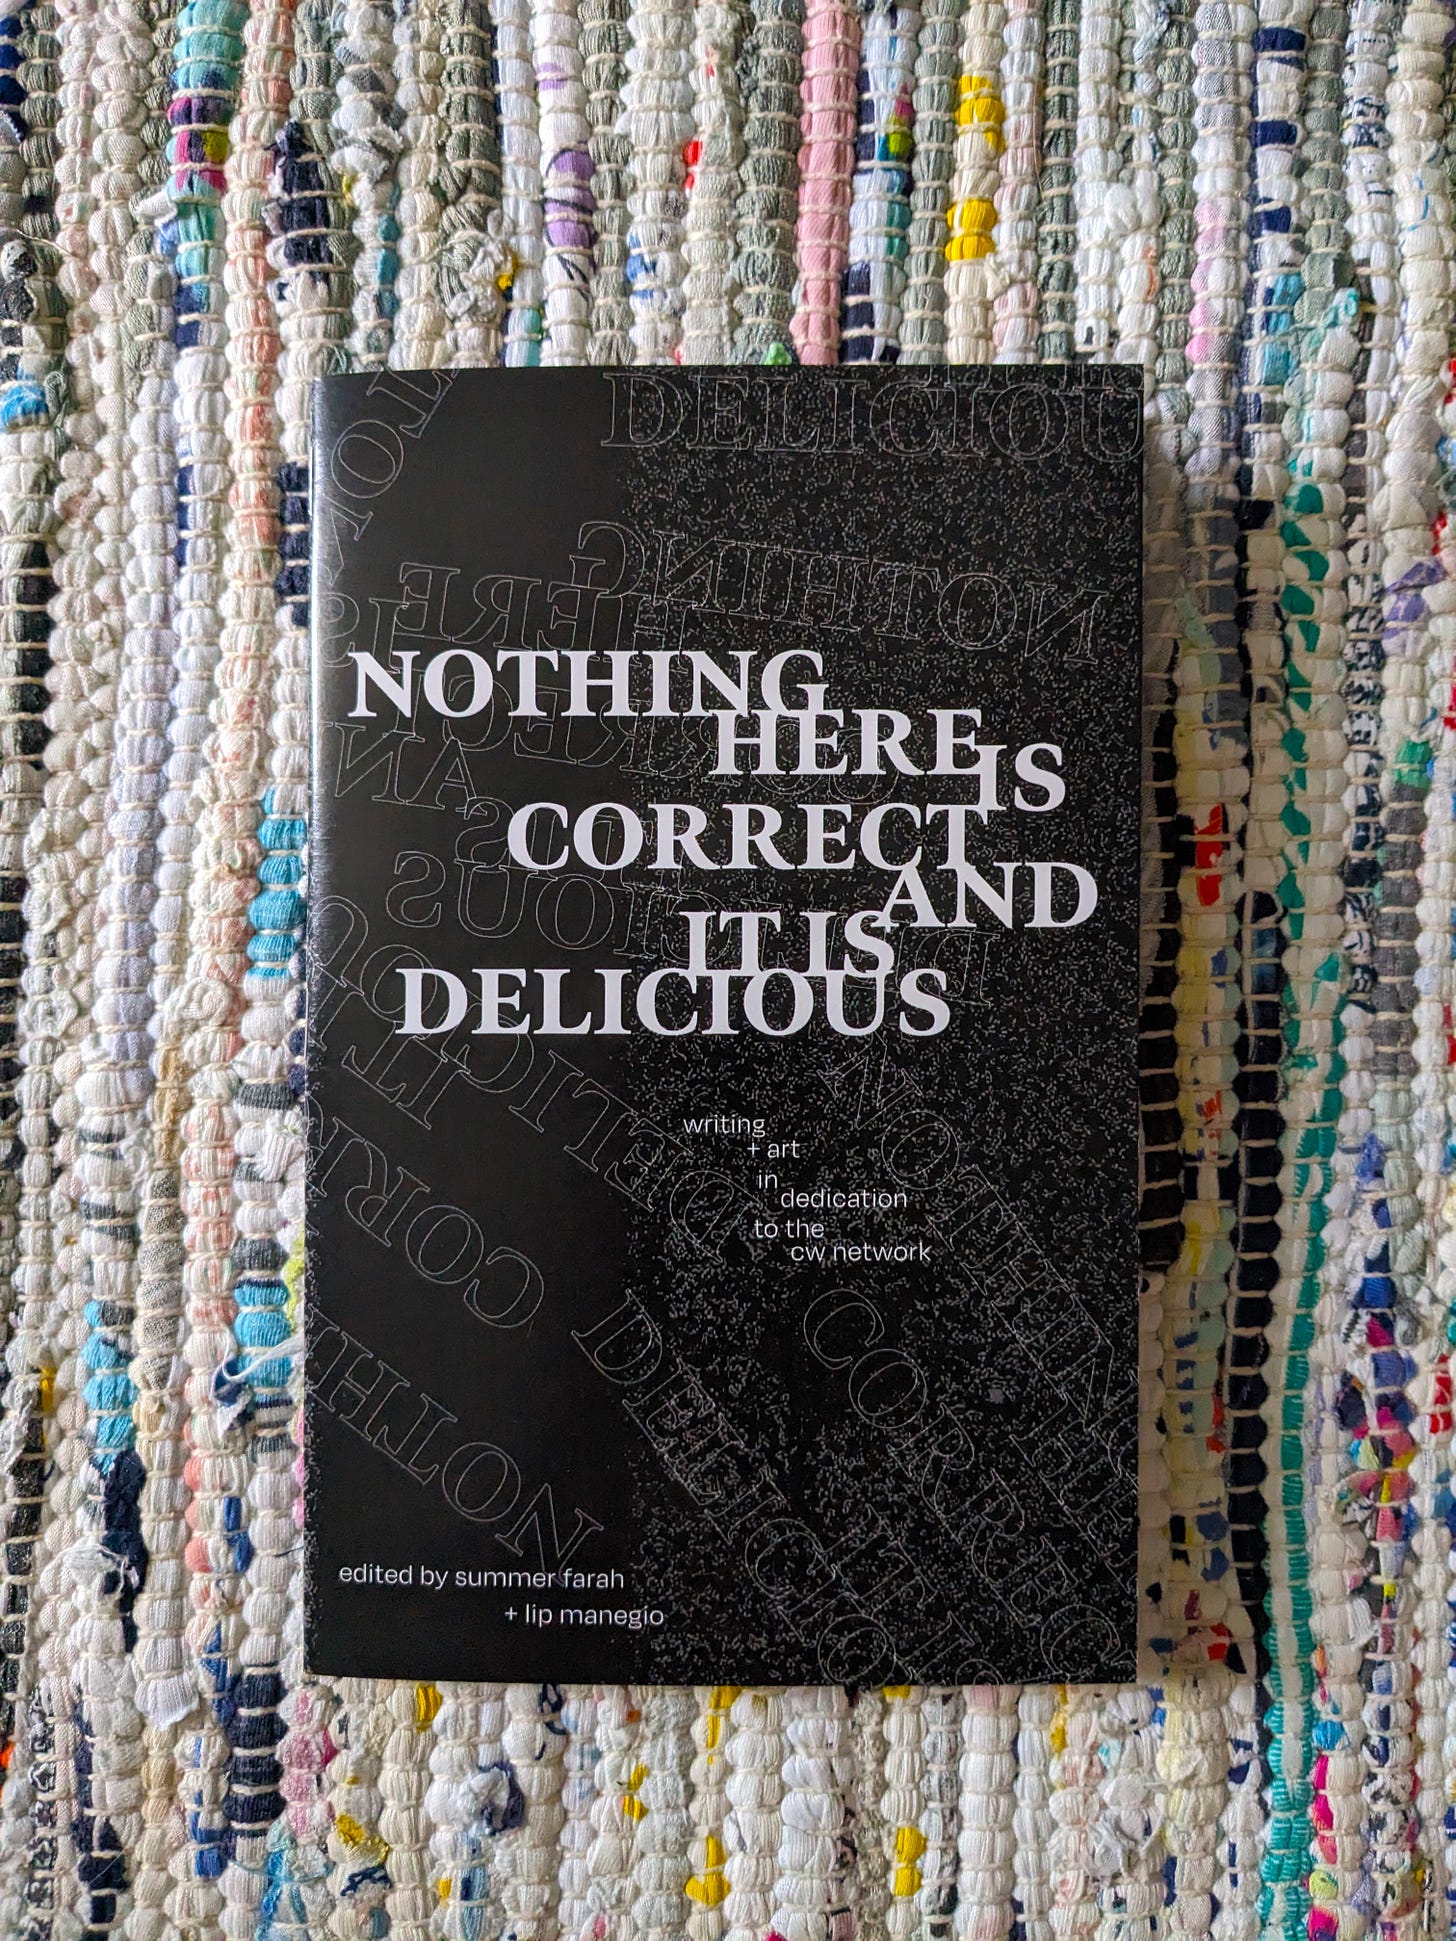 Monochromatic cover of the zine "NOTHING HERE IS CORRECT AND IT IS DELICIOUS" on a colorful rug.